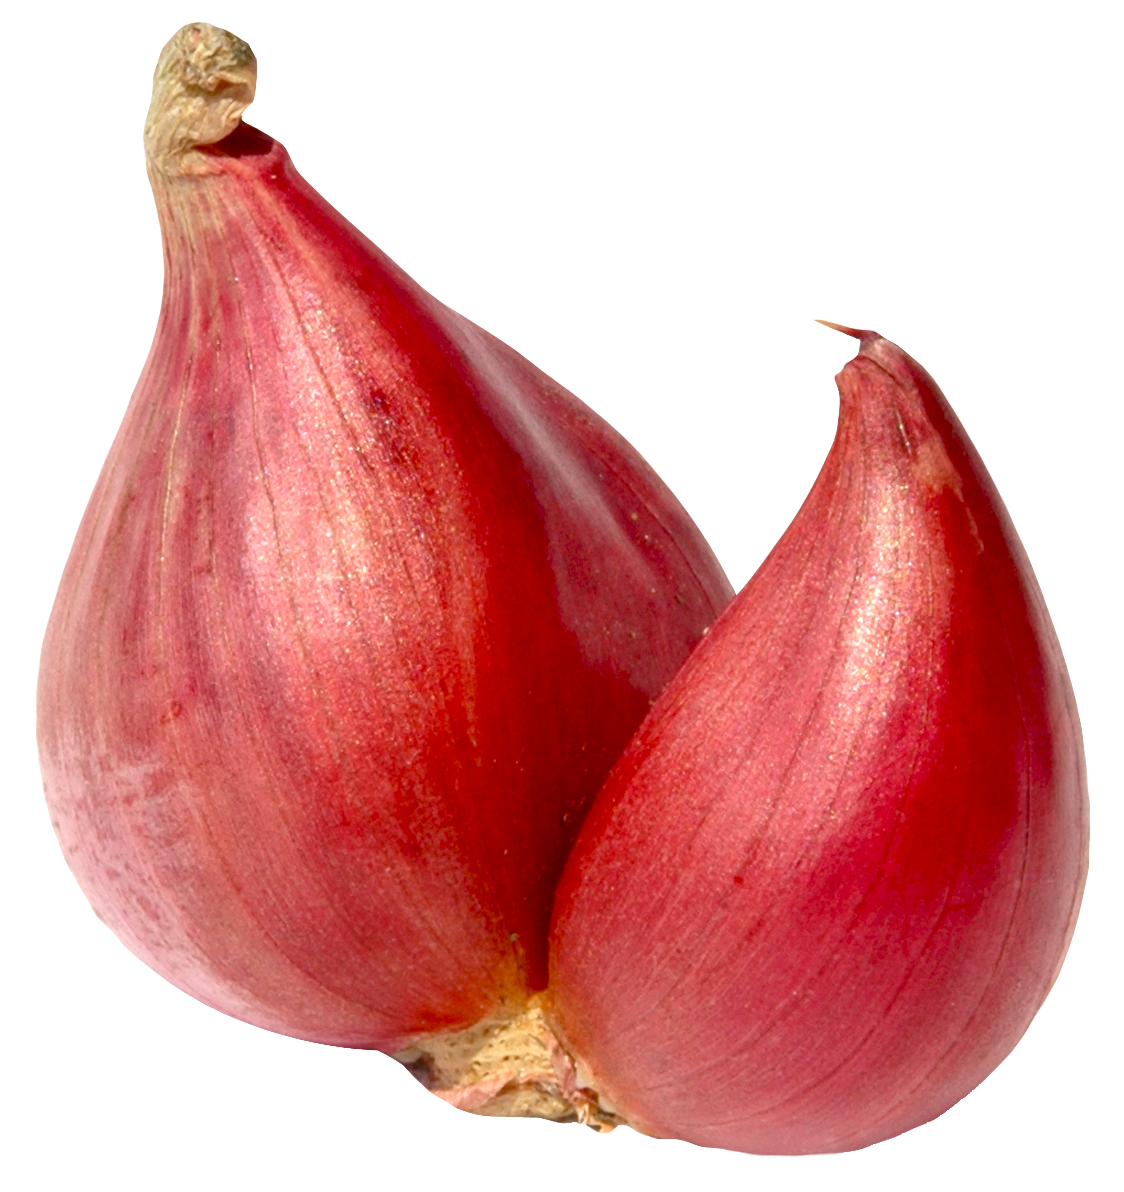 Png image purepng free. Onion clipart shallot